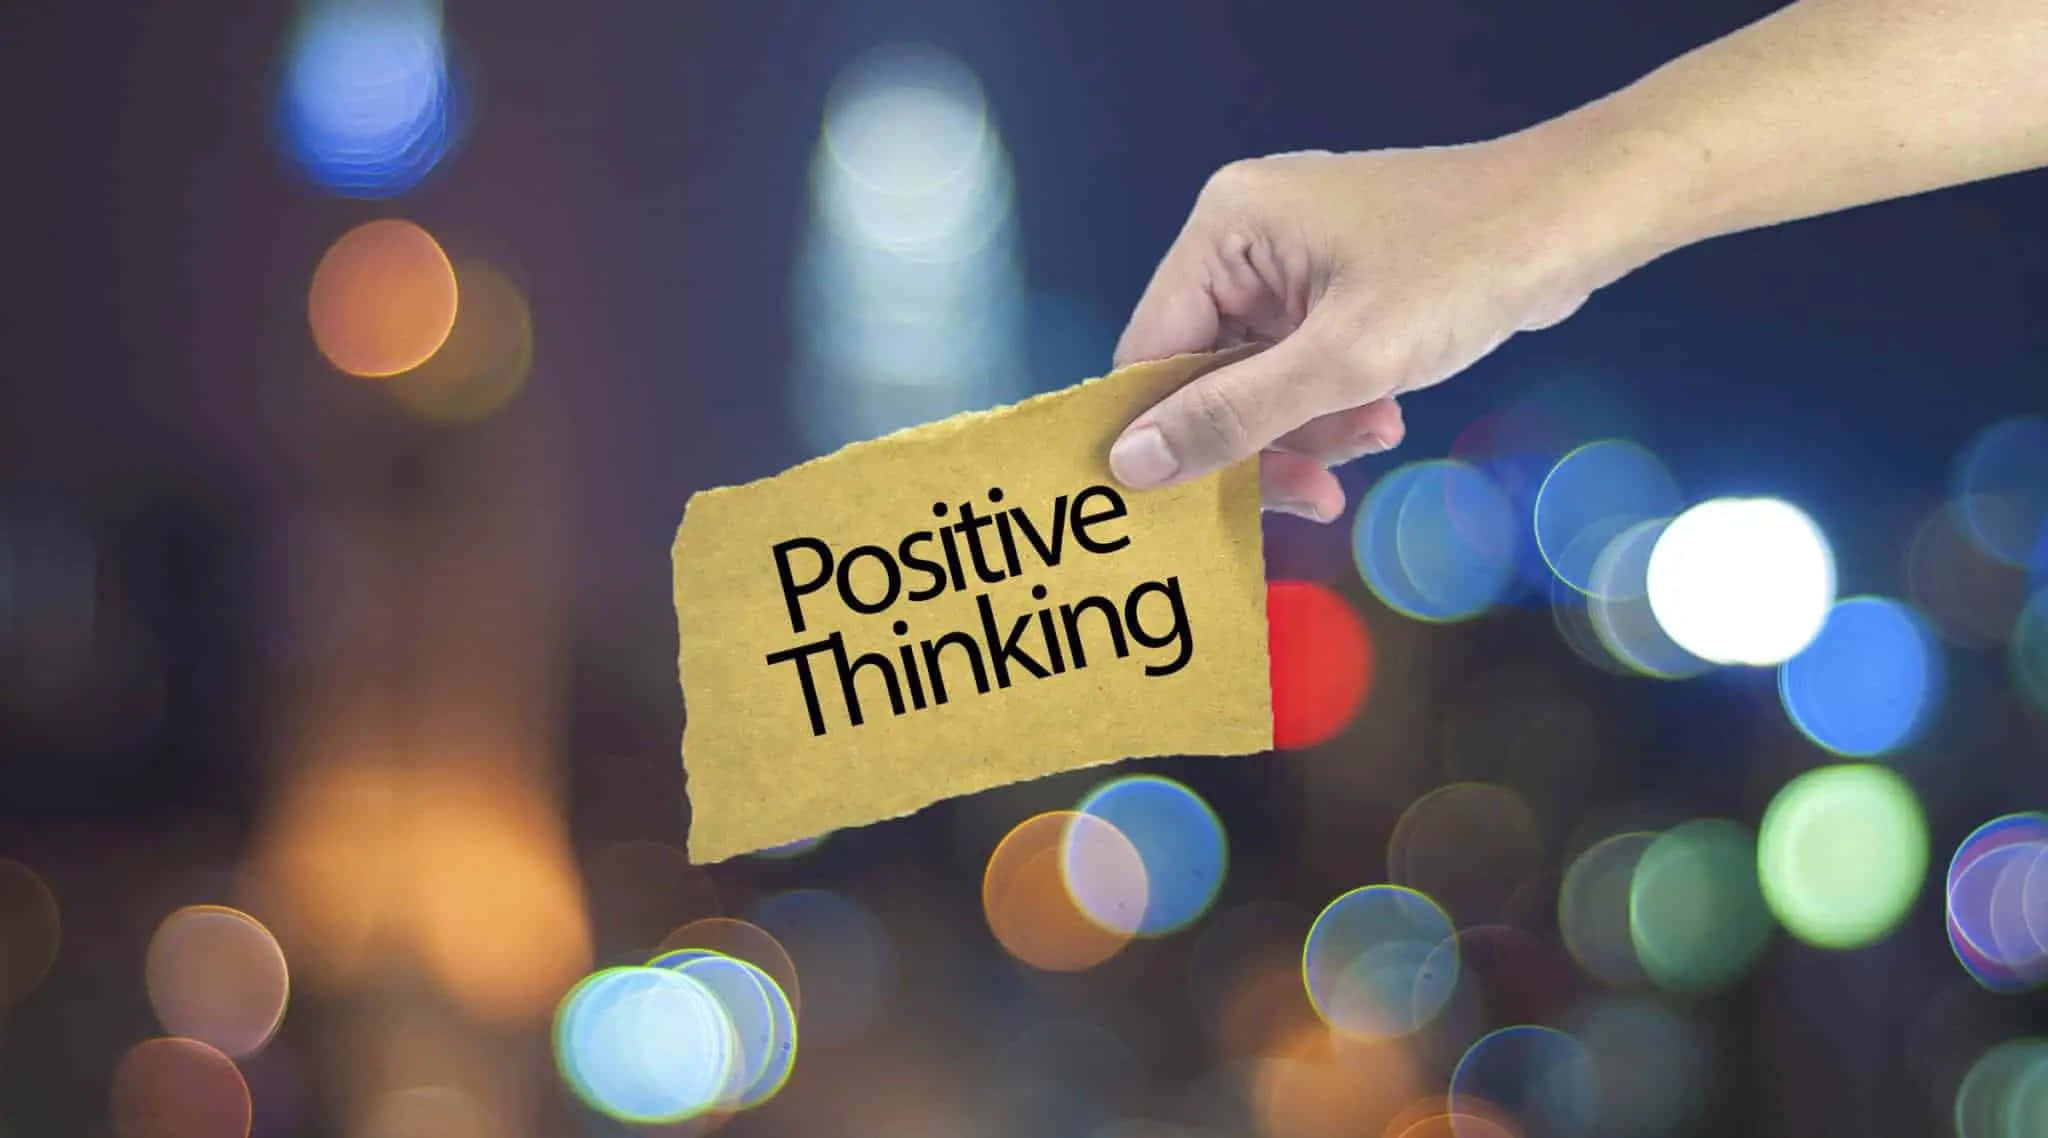 Positive Thinking - A Hand Holding A Piece Of Paper